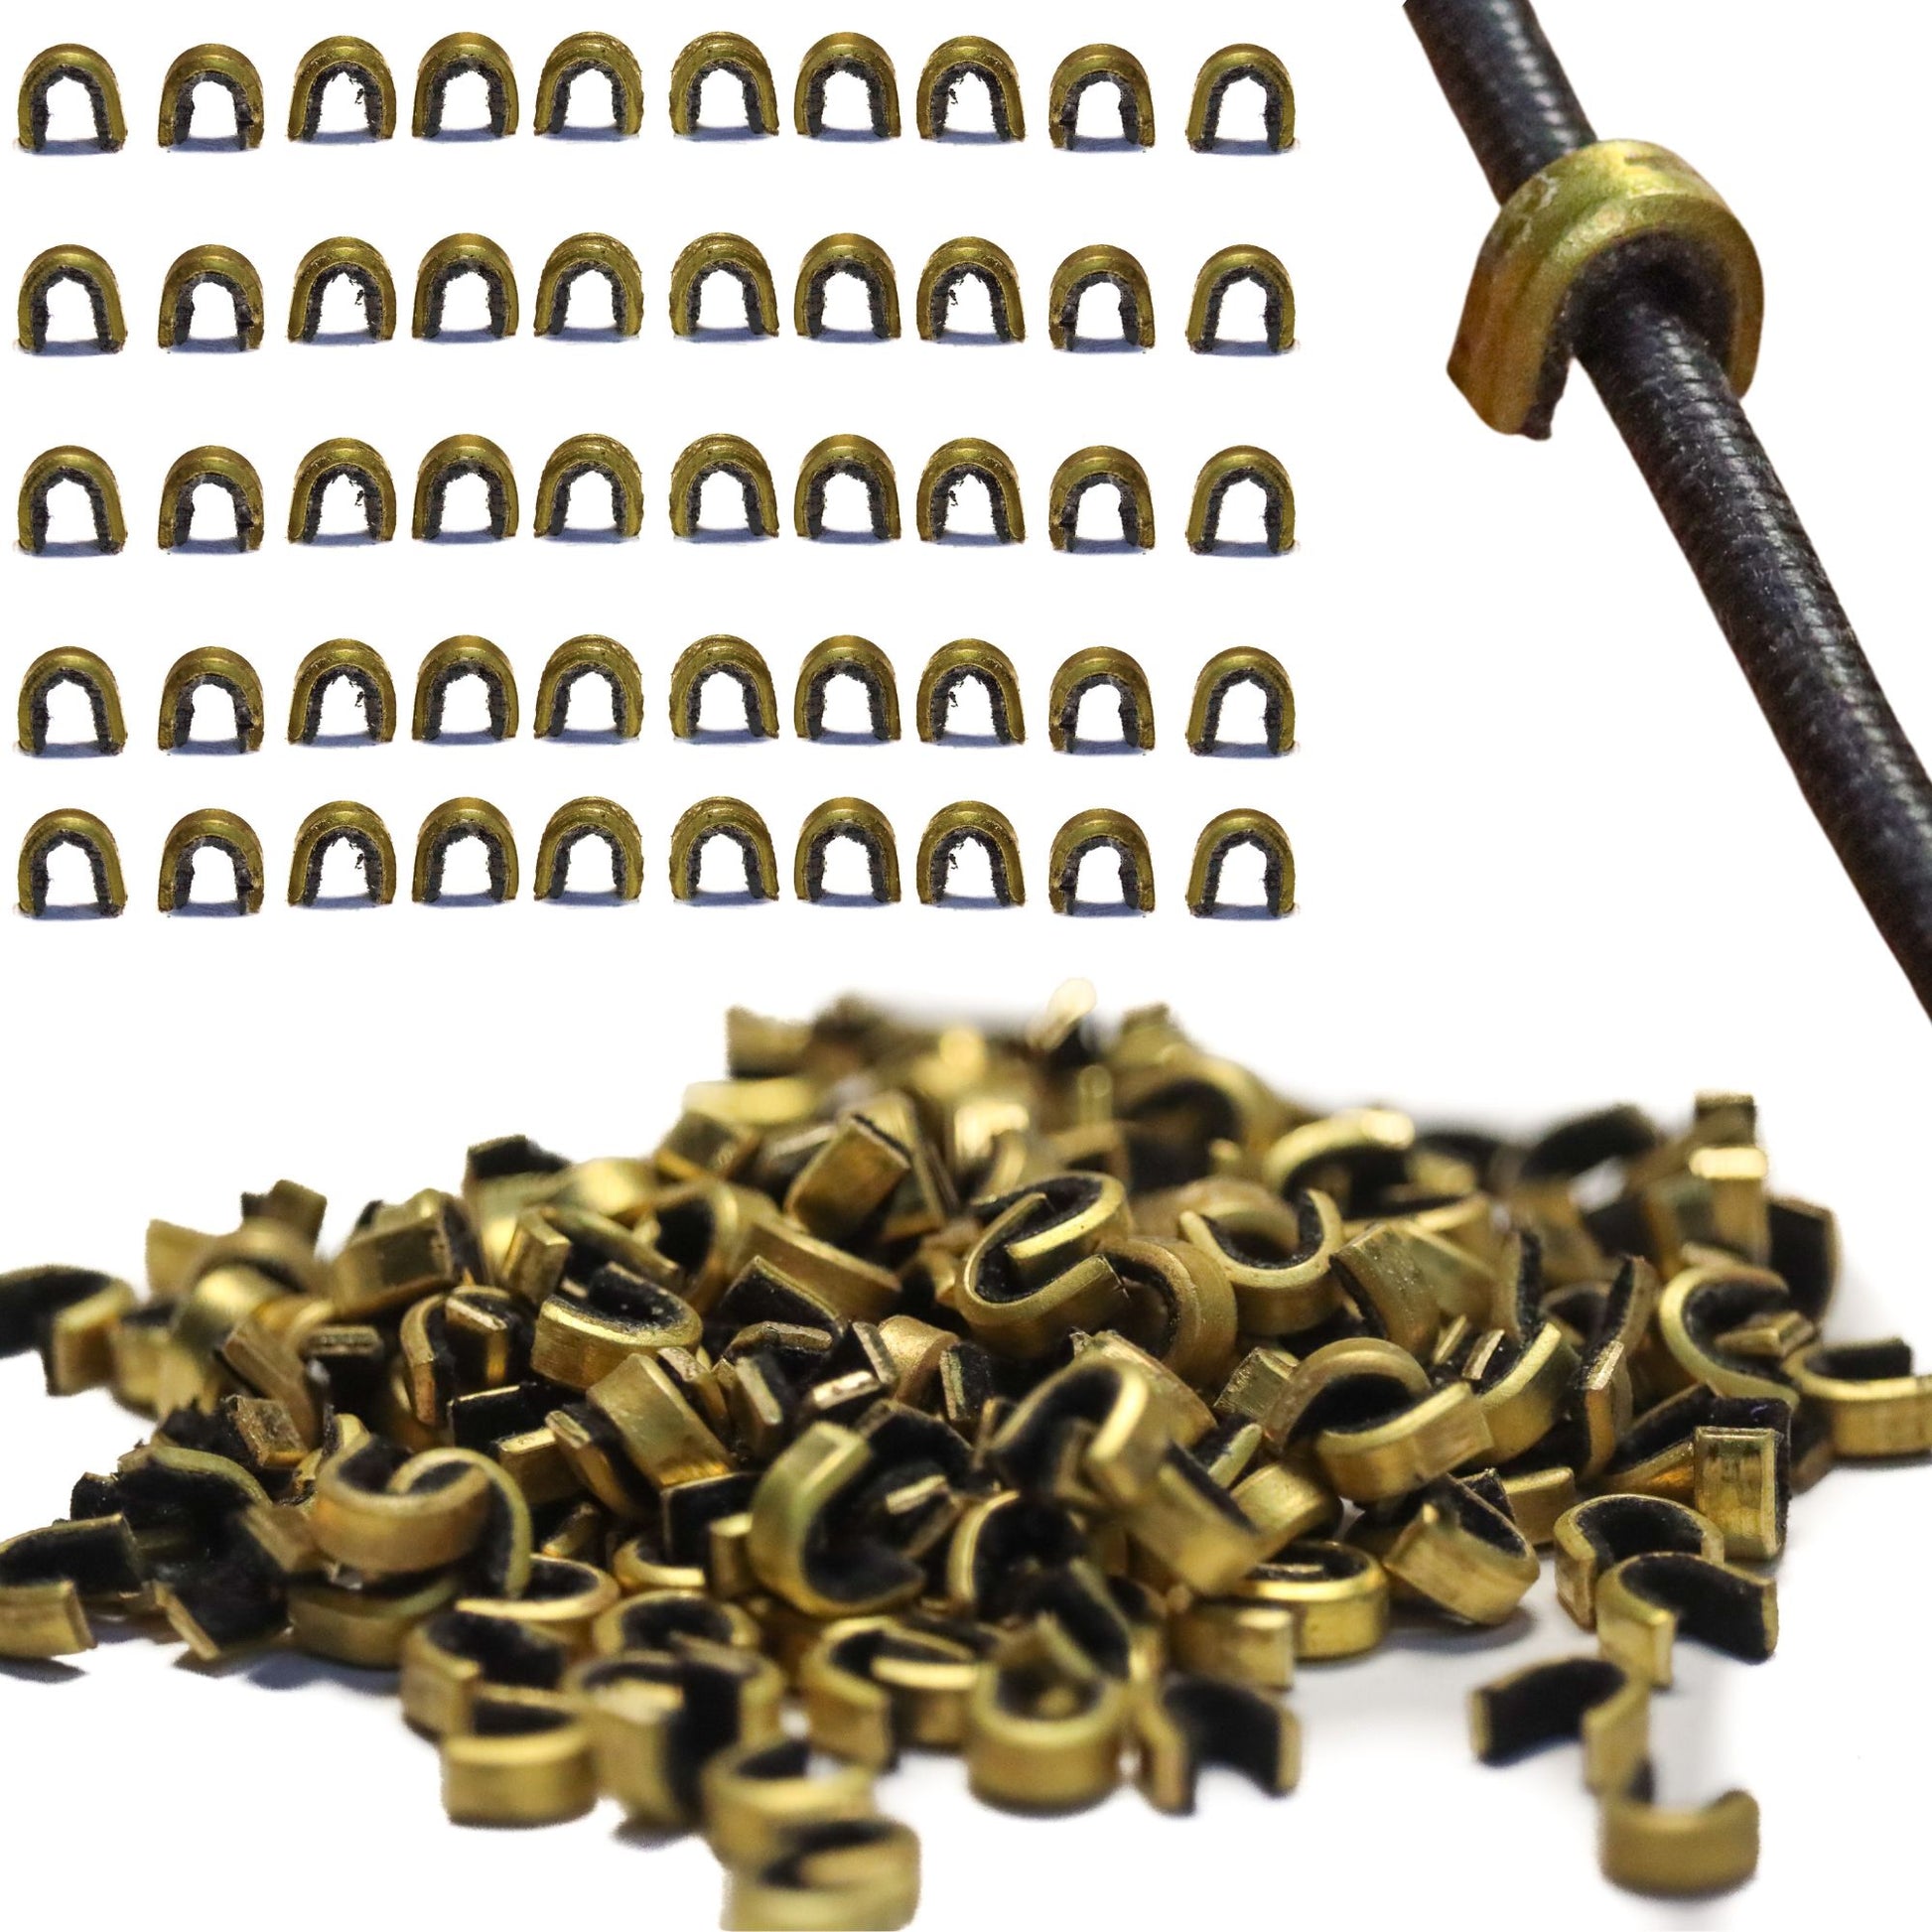 50pc Archery Bow String Nock Points Brass Nocking Buckle Clips Protector  Hunting